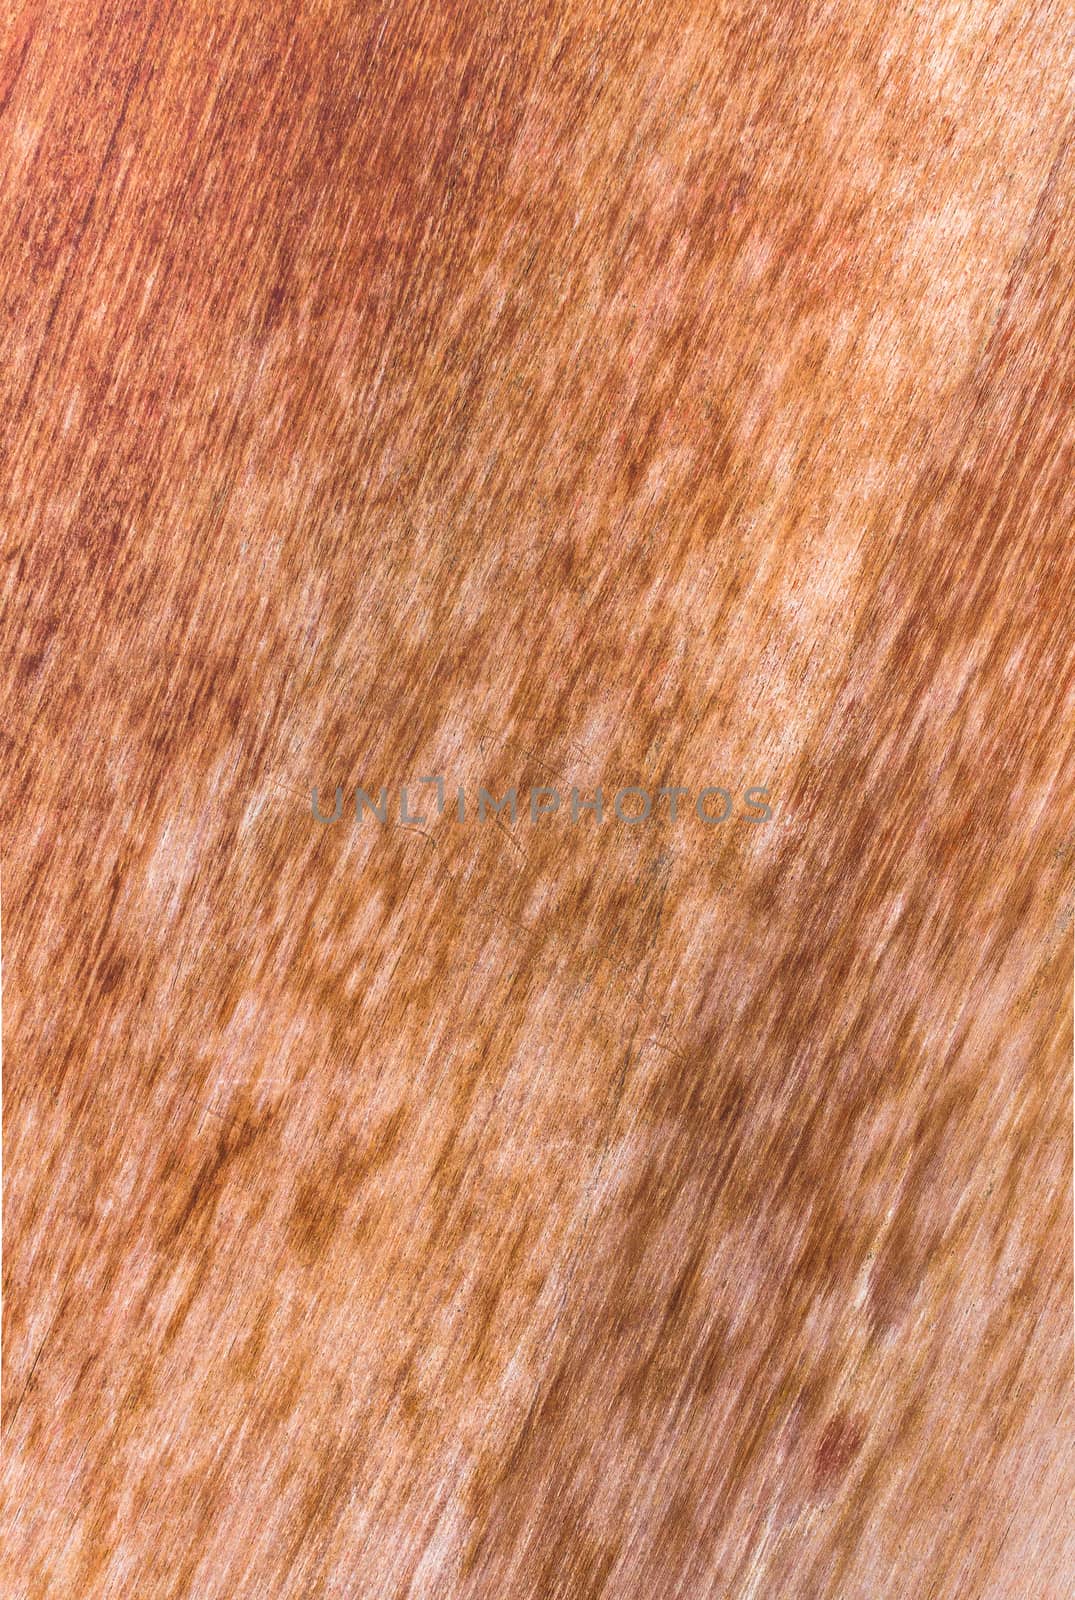 Hight resolution natural woodgrain texture background by nopparats